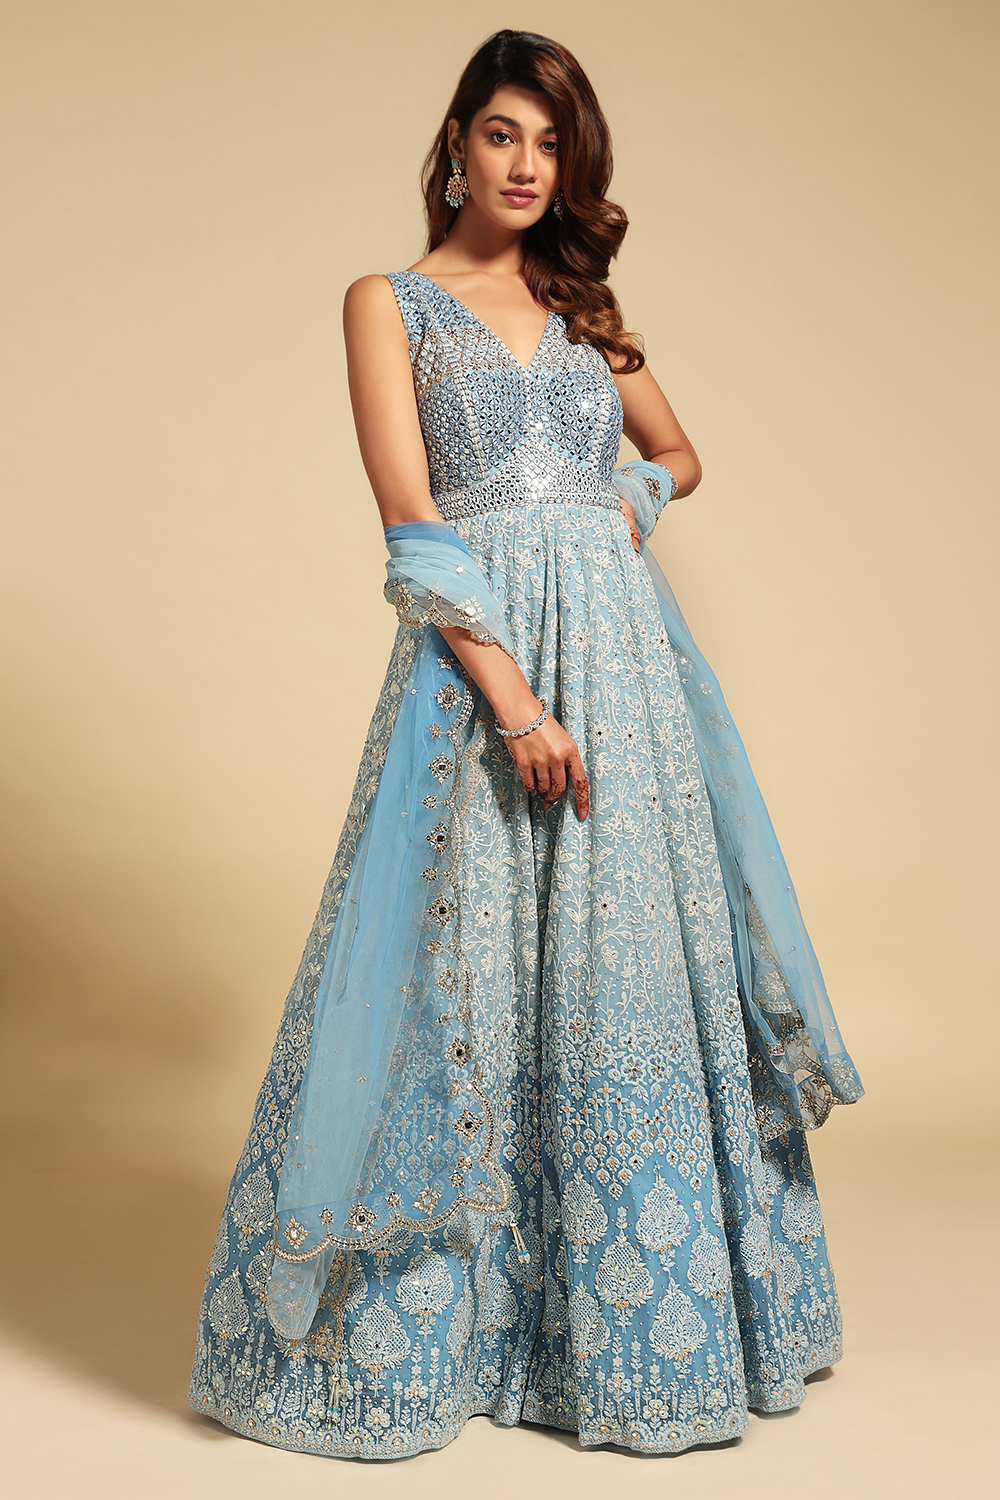 8 Go-To Designers for Indo-Western Outfits for 2019 Brides